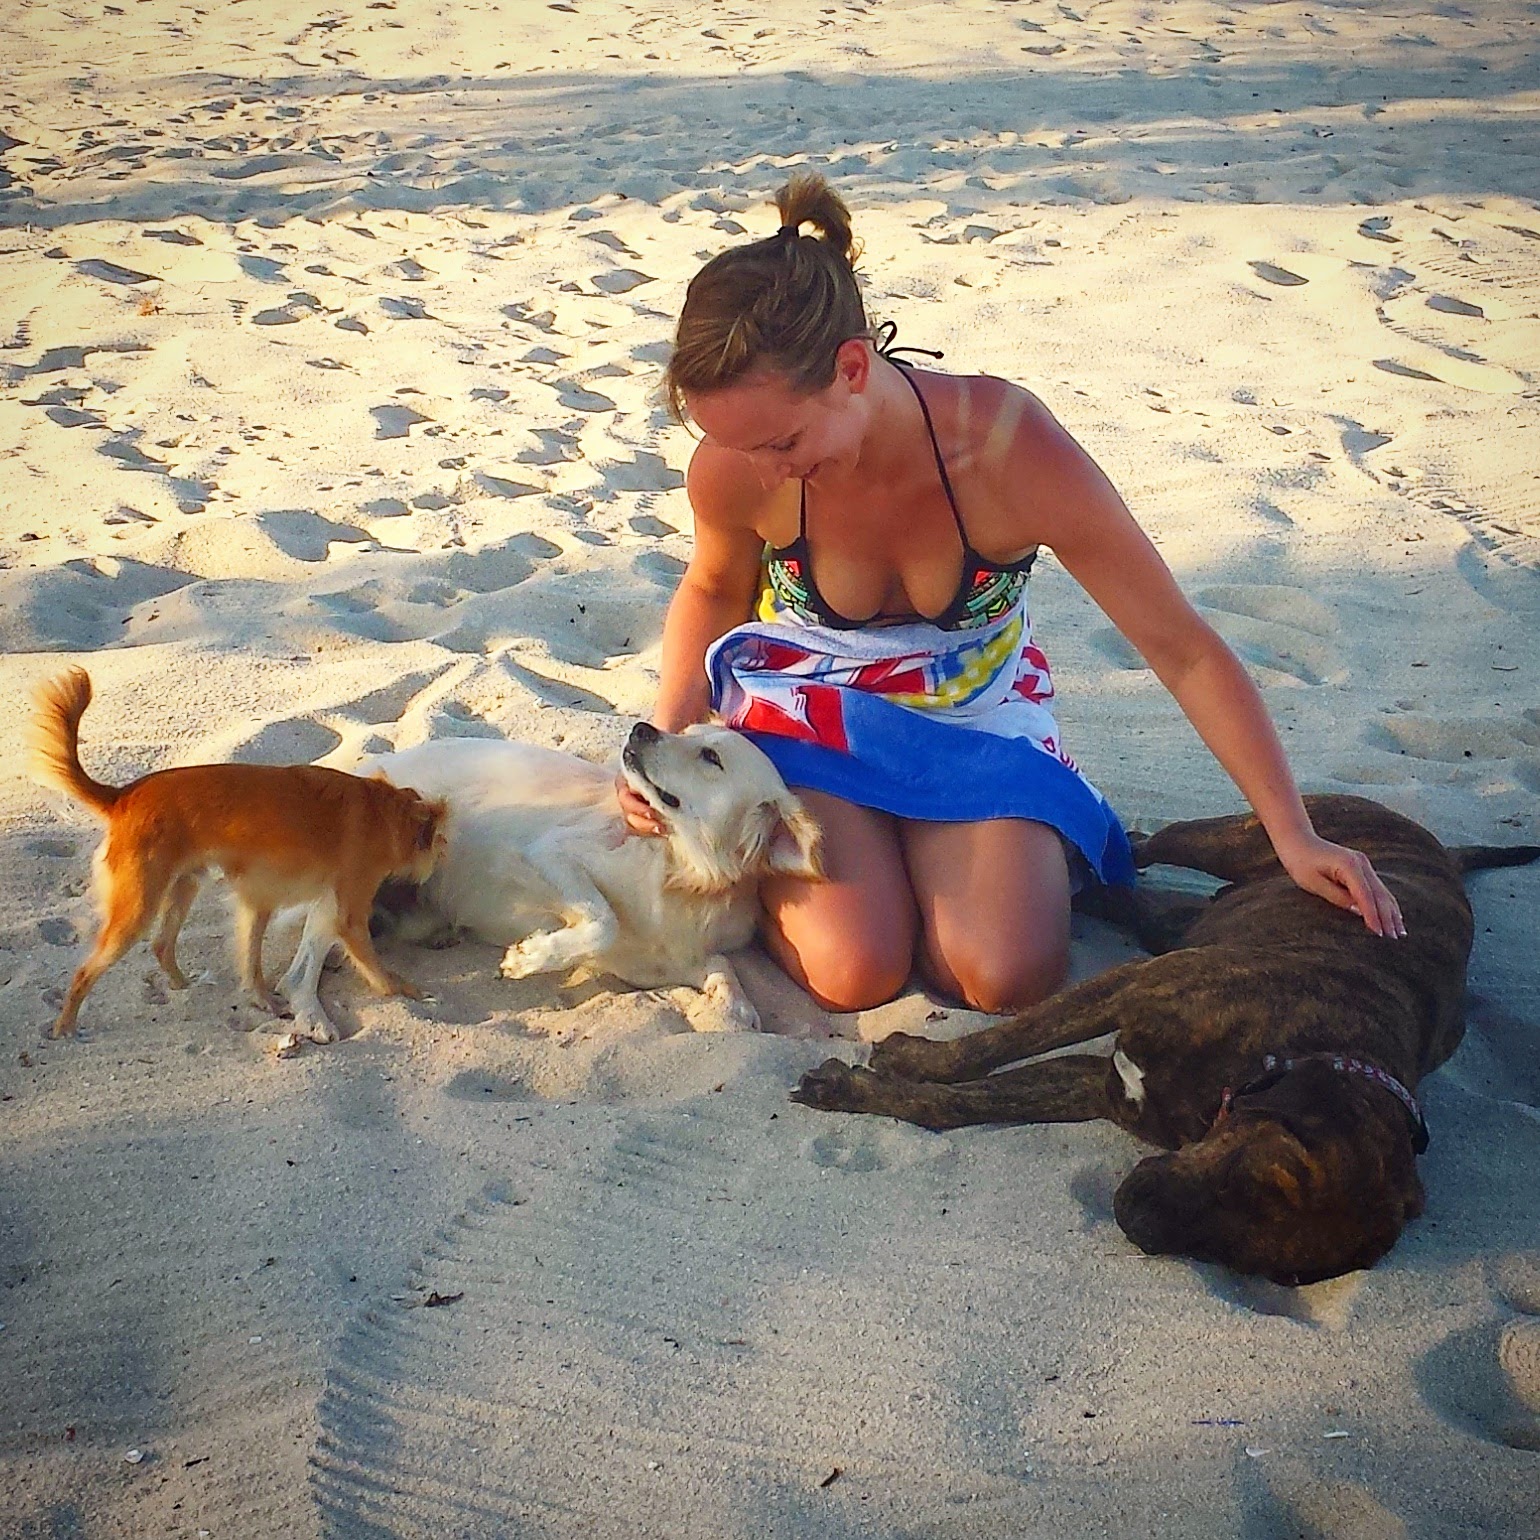 Remax Vip Belize: Beach dogs lick her face.